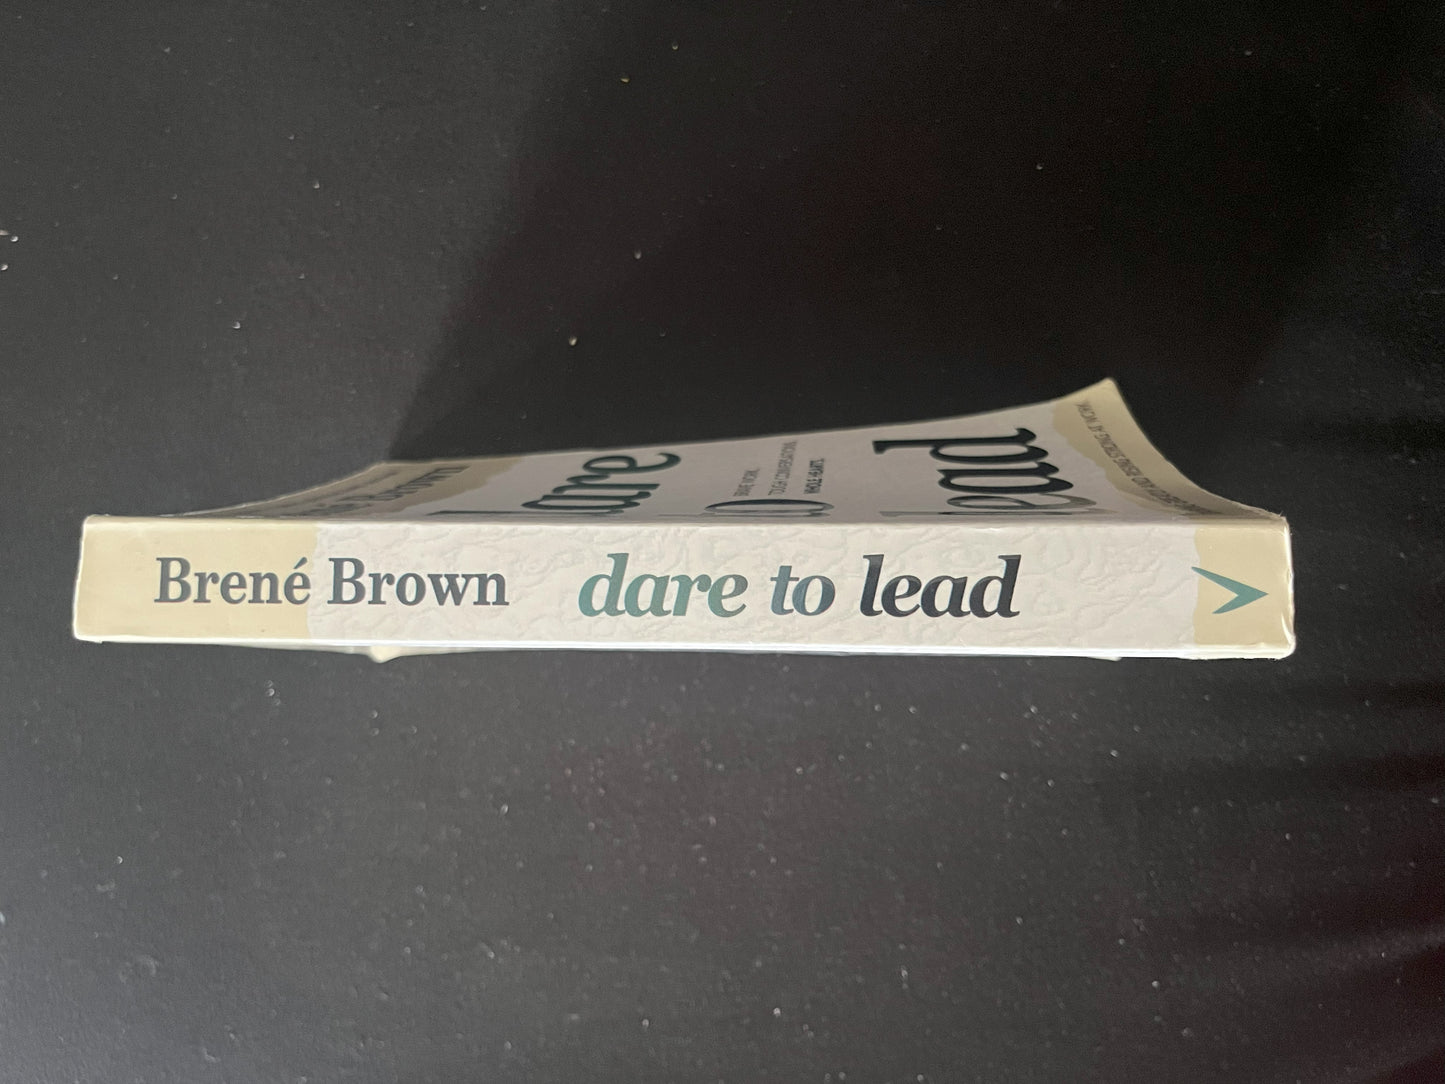 DARE TO LEAD by Brené Brown